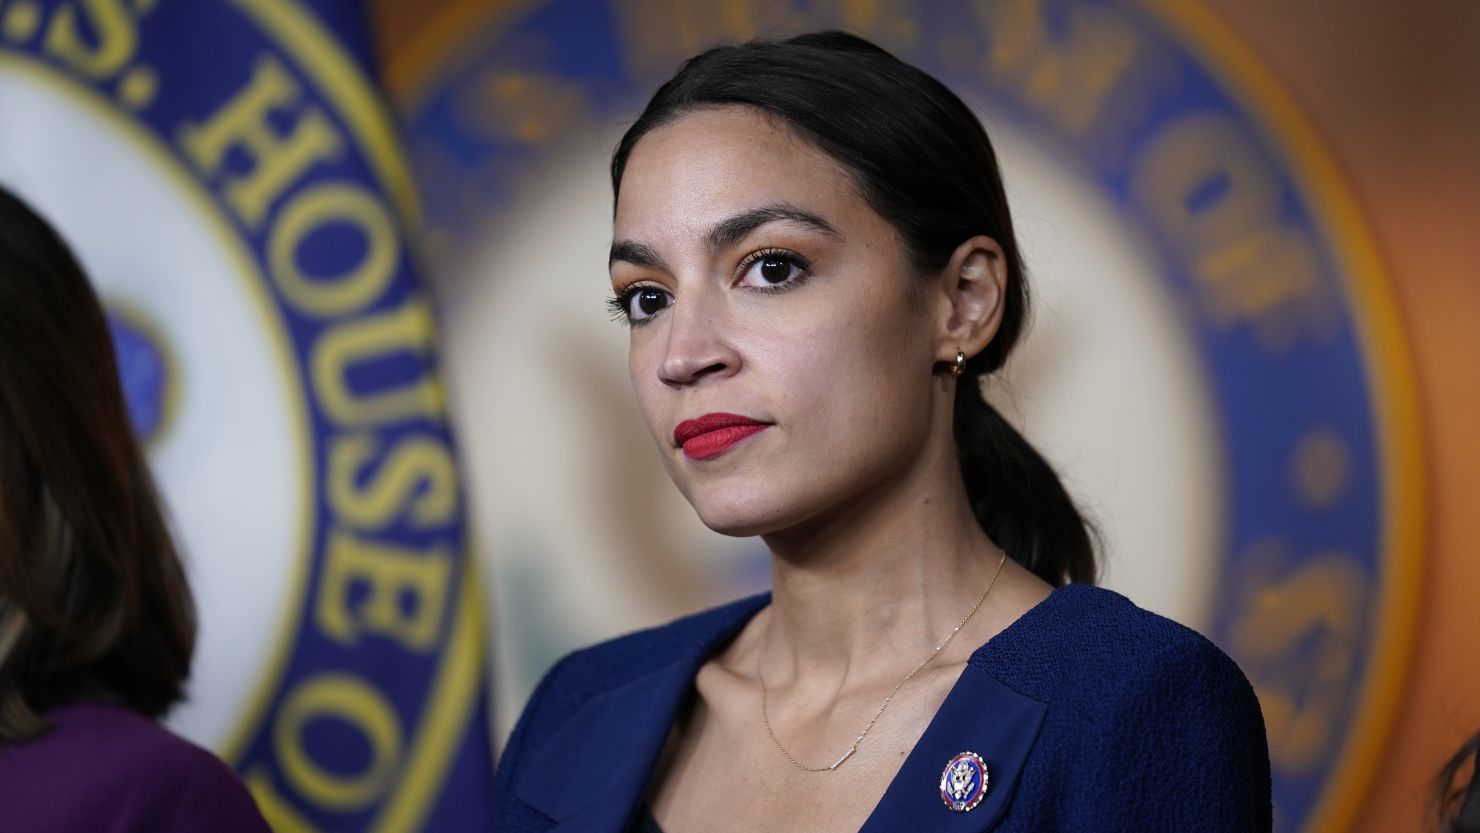 In this June 16, 2021, file photo, Rep. Alexandria Ocasio-Cortez, D-N.Y., listens as House Speaker Nancy Pelosi, D-Calif., speaks during a news conference at the Capitol in Washington. 